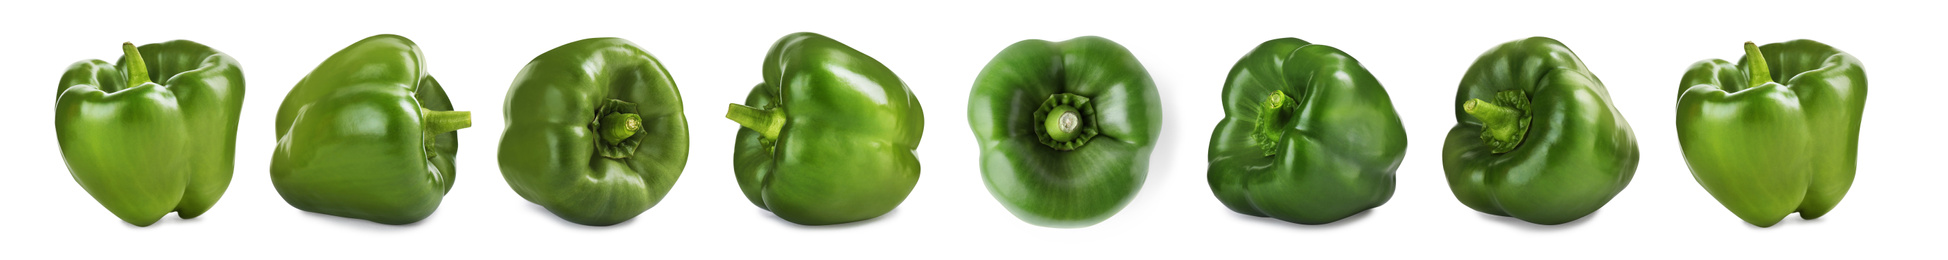 Set of ripe green bell peppers on white background. Banner design